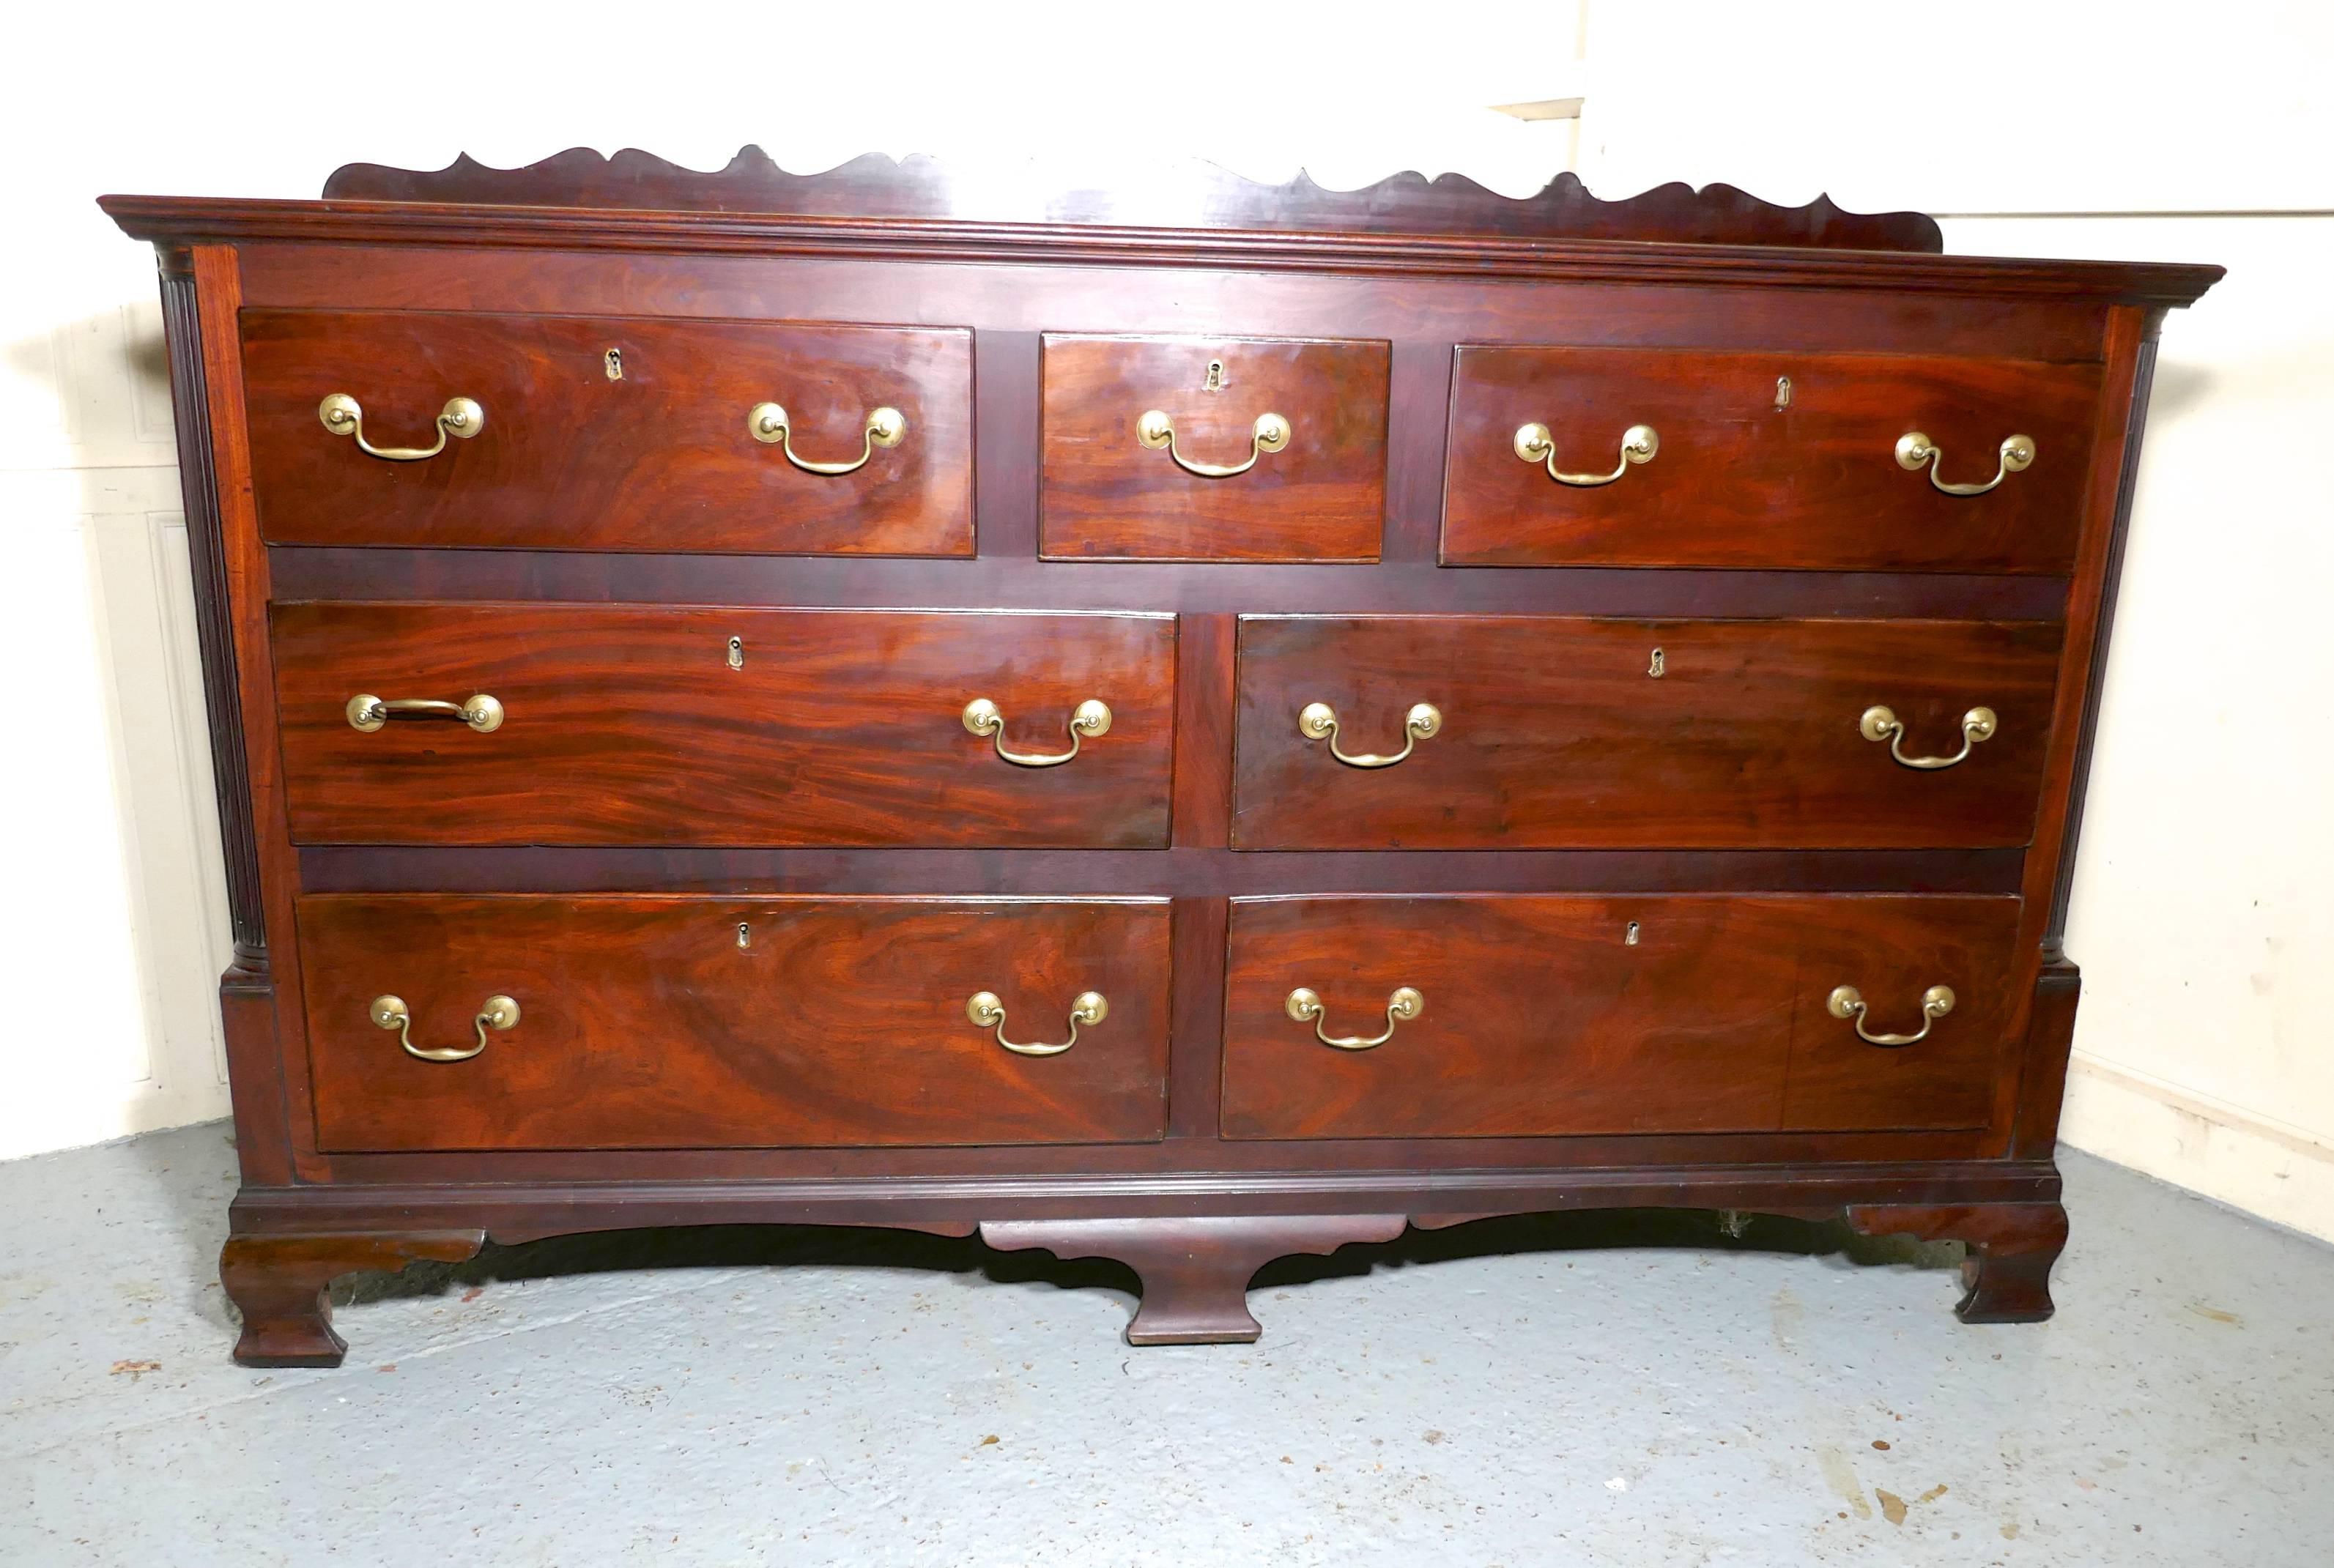 Large 18th Century Mahogany Lancashire Chest of Drawers George III Dresser

This is an exceptionally fine quality piece, this is an 18th century George III chest of Drawers or Dresser circa 1780, it is oak lined and has an oak planked back
The chest